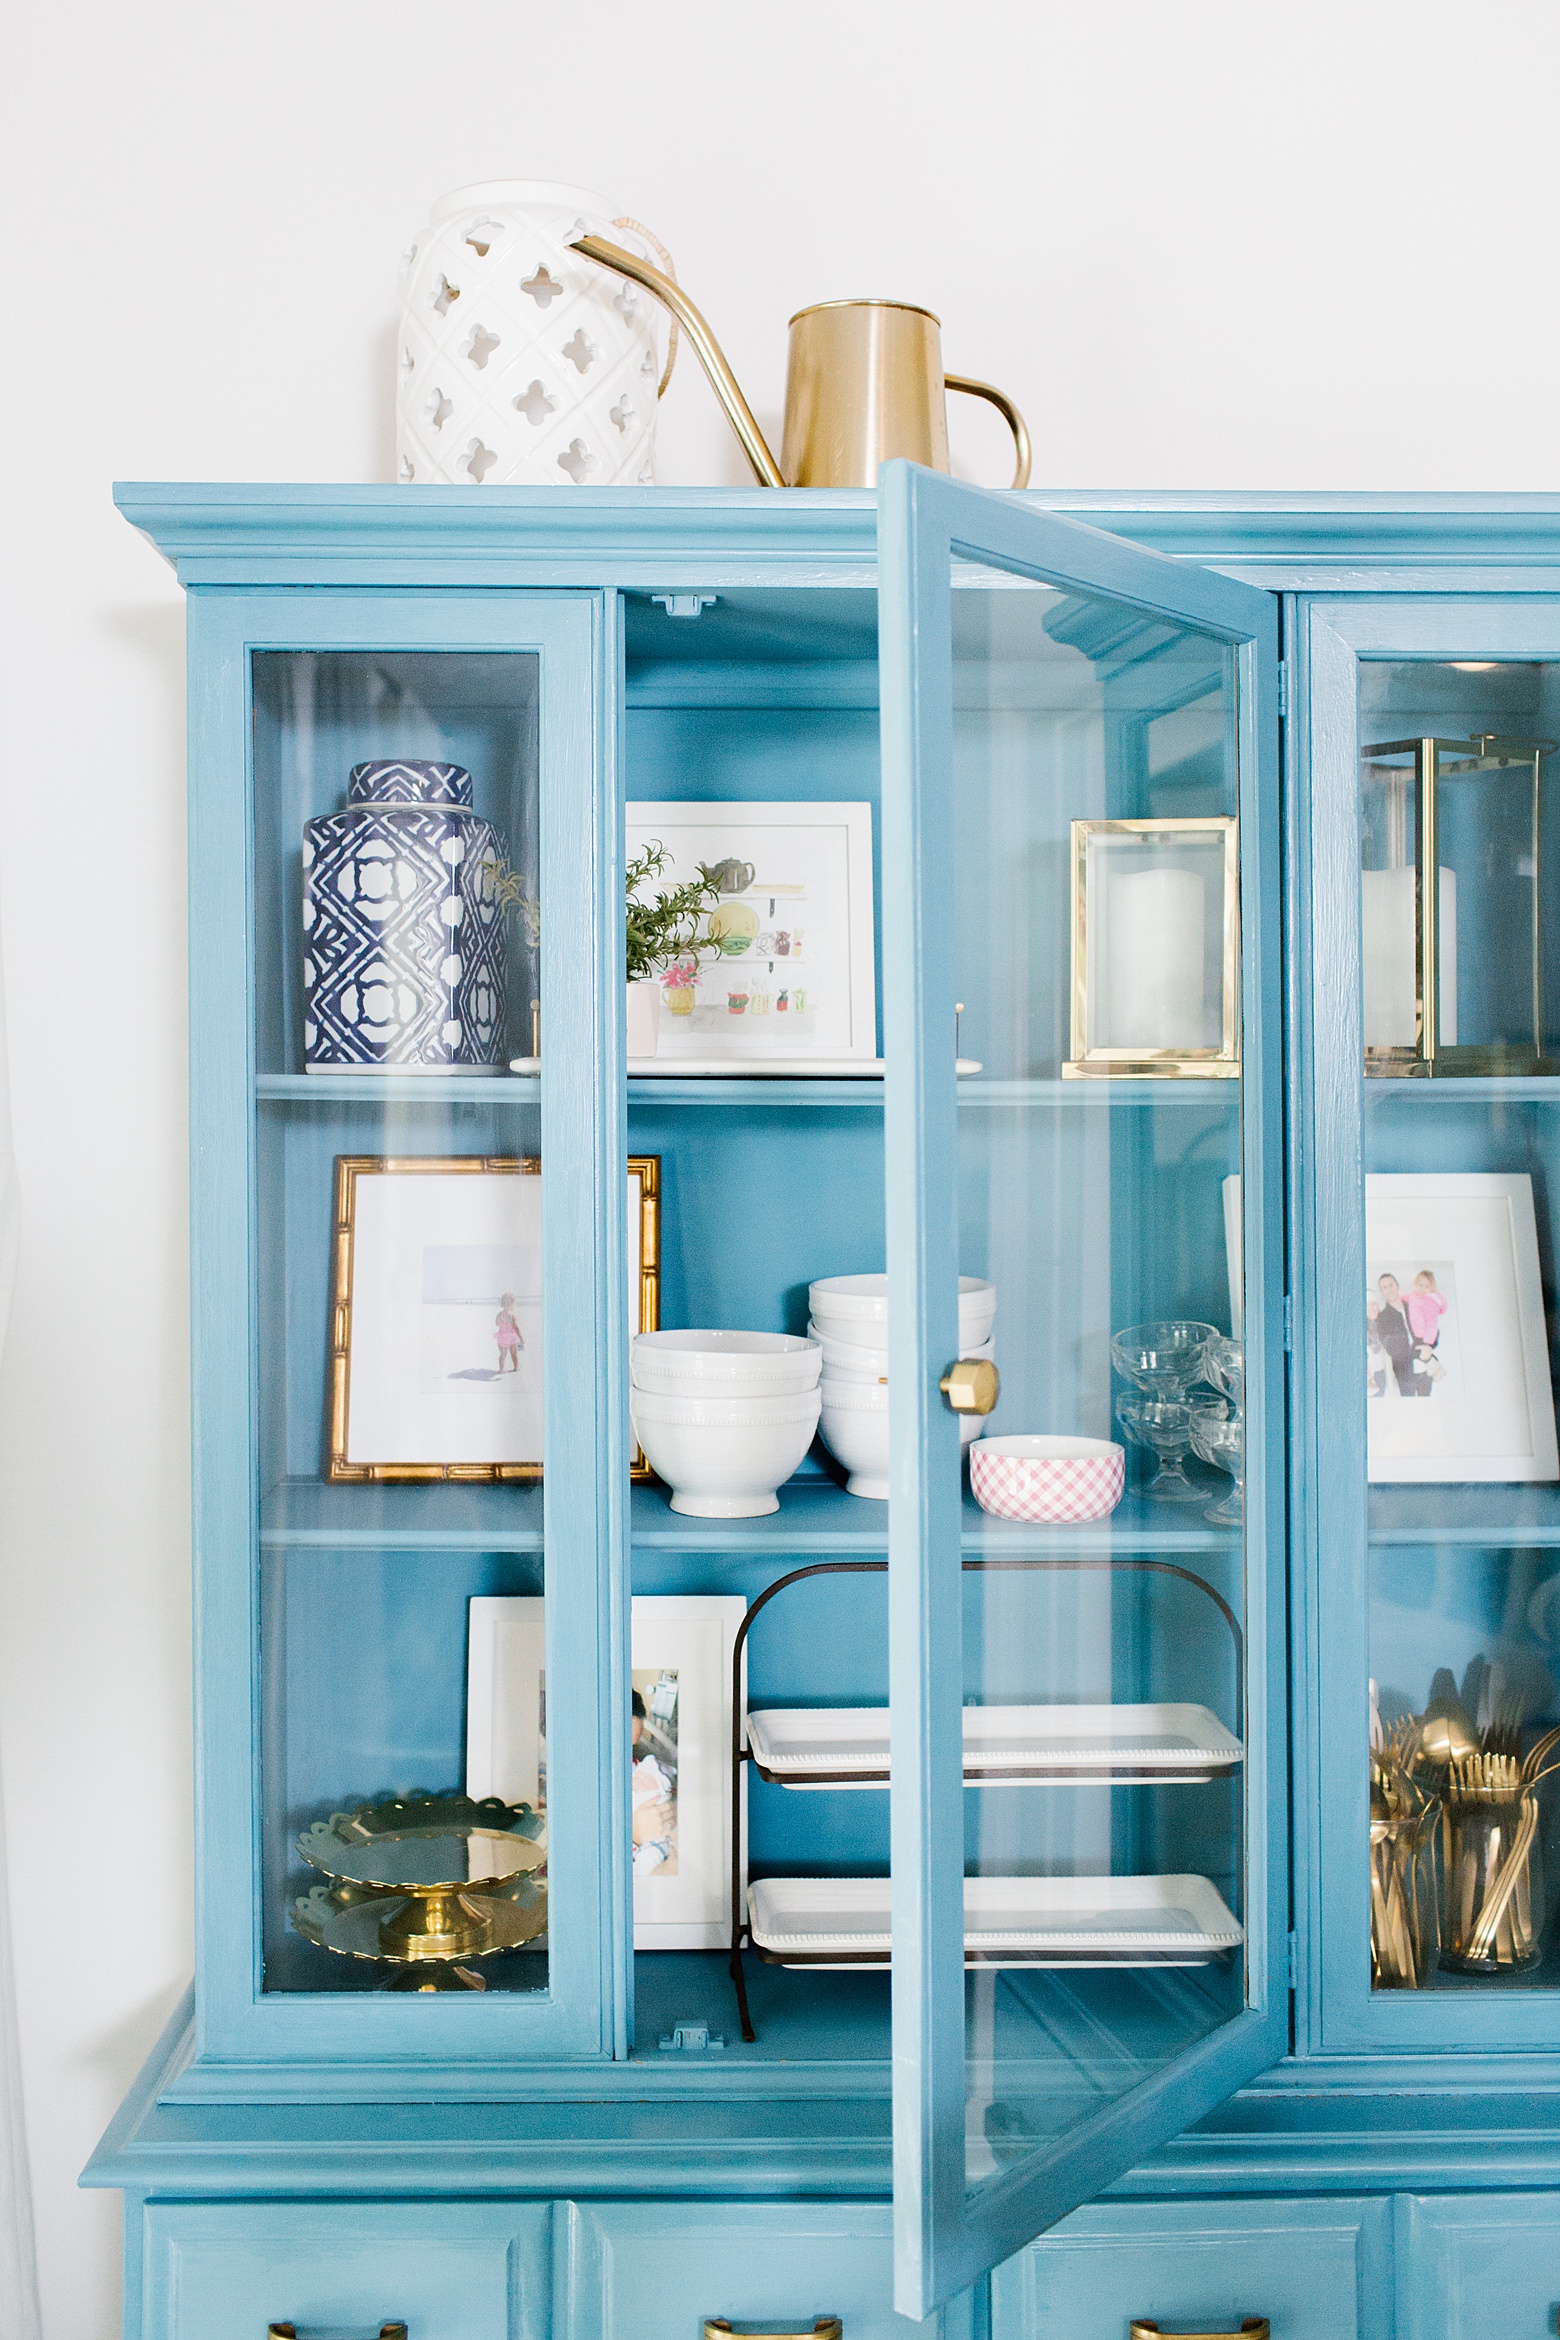 designer tips to decorating with color and pattern in your home on Megan Martin Creative, A vintage hutch in blue! Chalk paint, Amy Howard Home Rugo, bright white kitchen, gold white and navy kitchen, anthropologie knobs